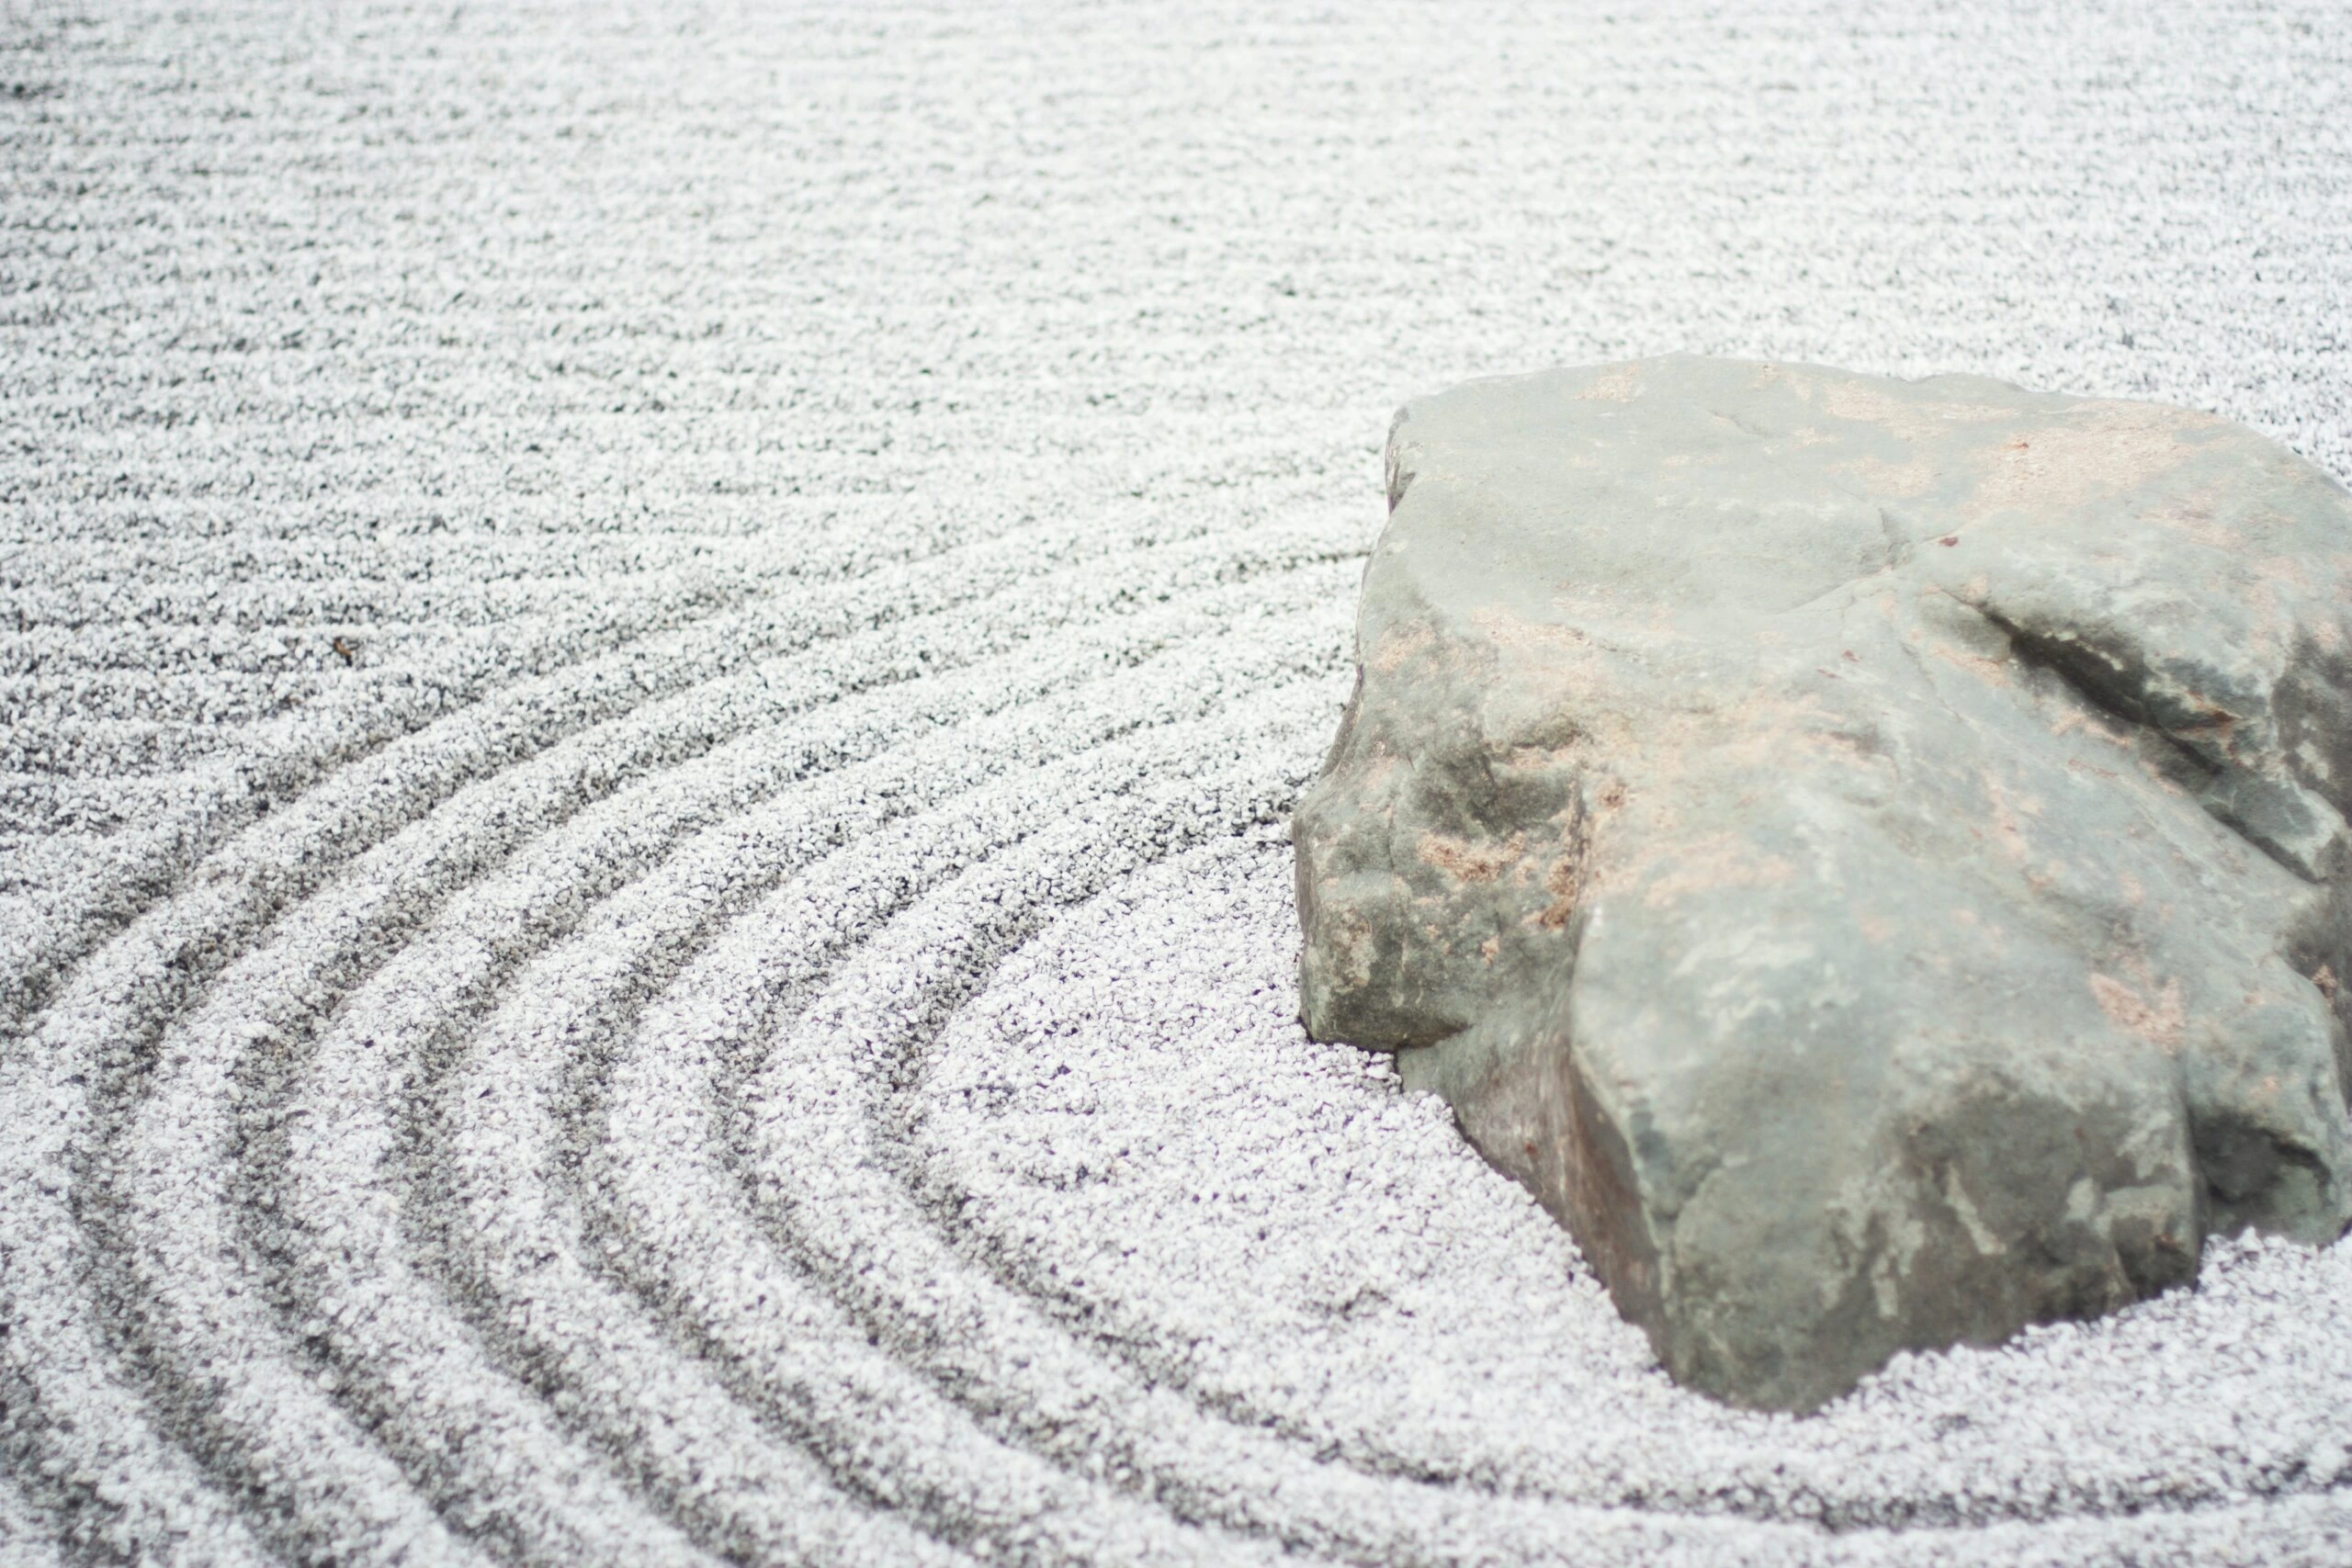 Zen Rock Garden with concentric circles in sand made by rake by Kari Shea on Unsplash